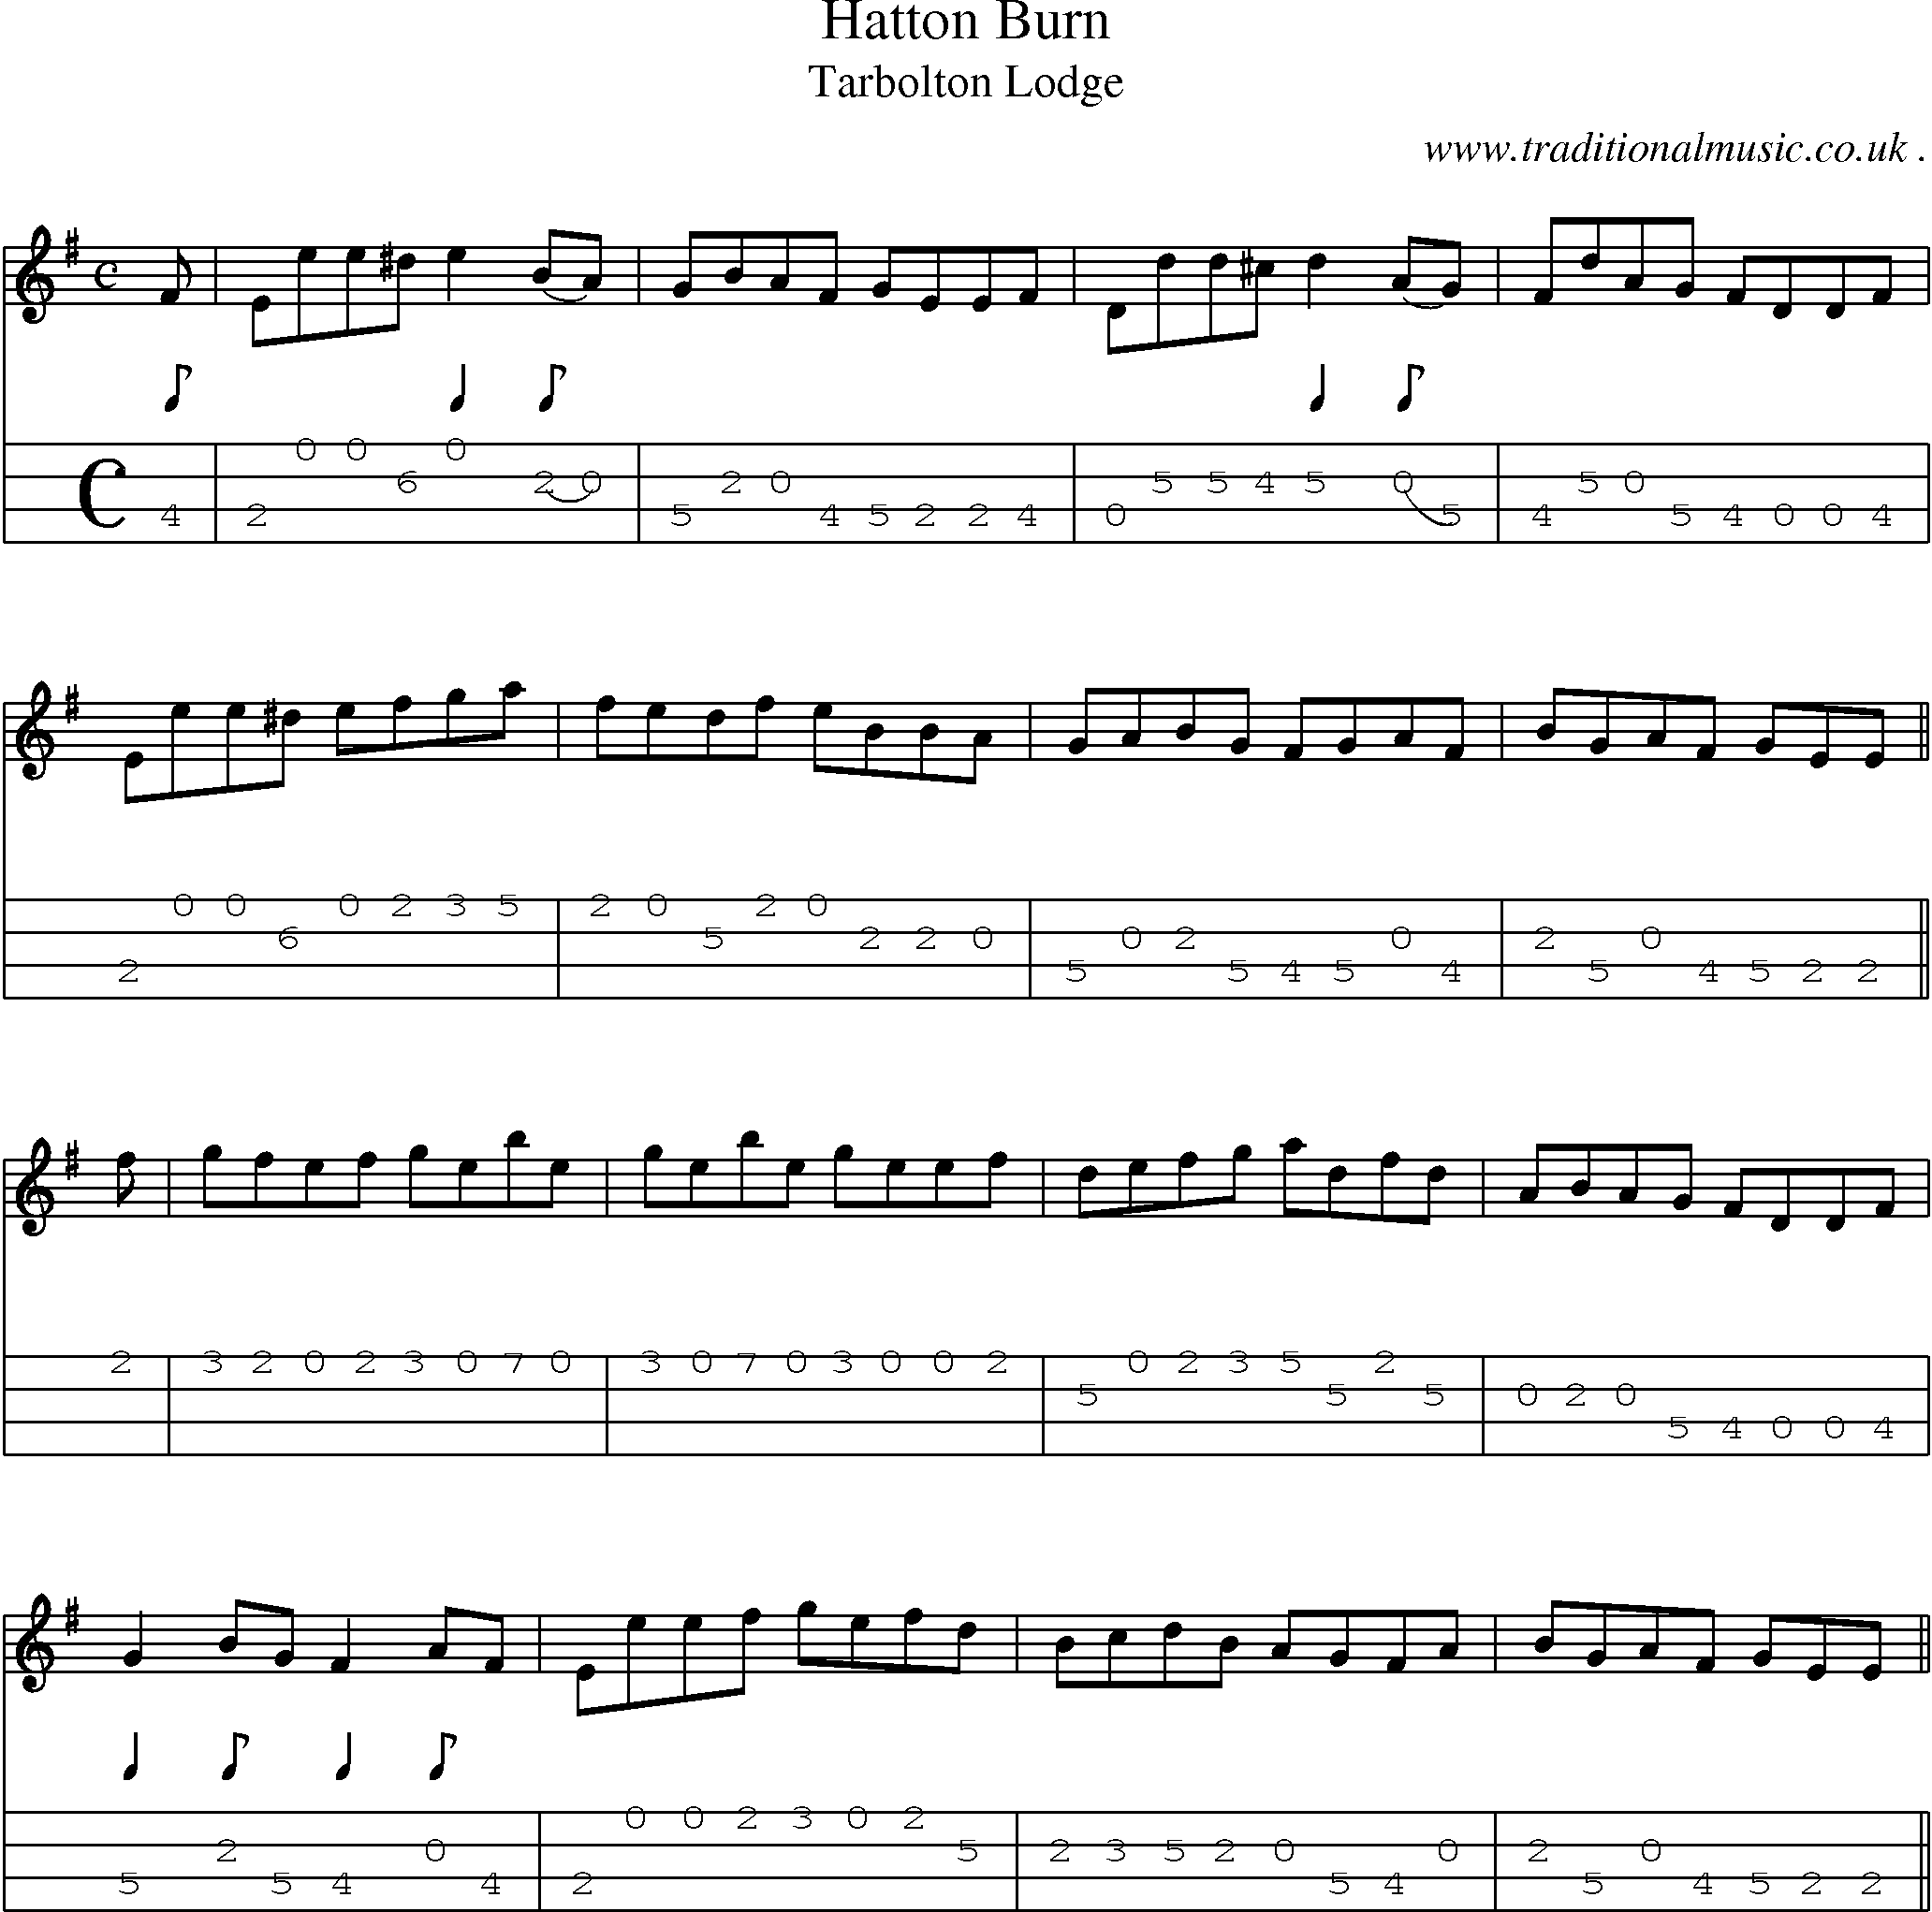 Sheet-music  score, Chords and Mandolin Tabs for Hatton Burn